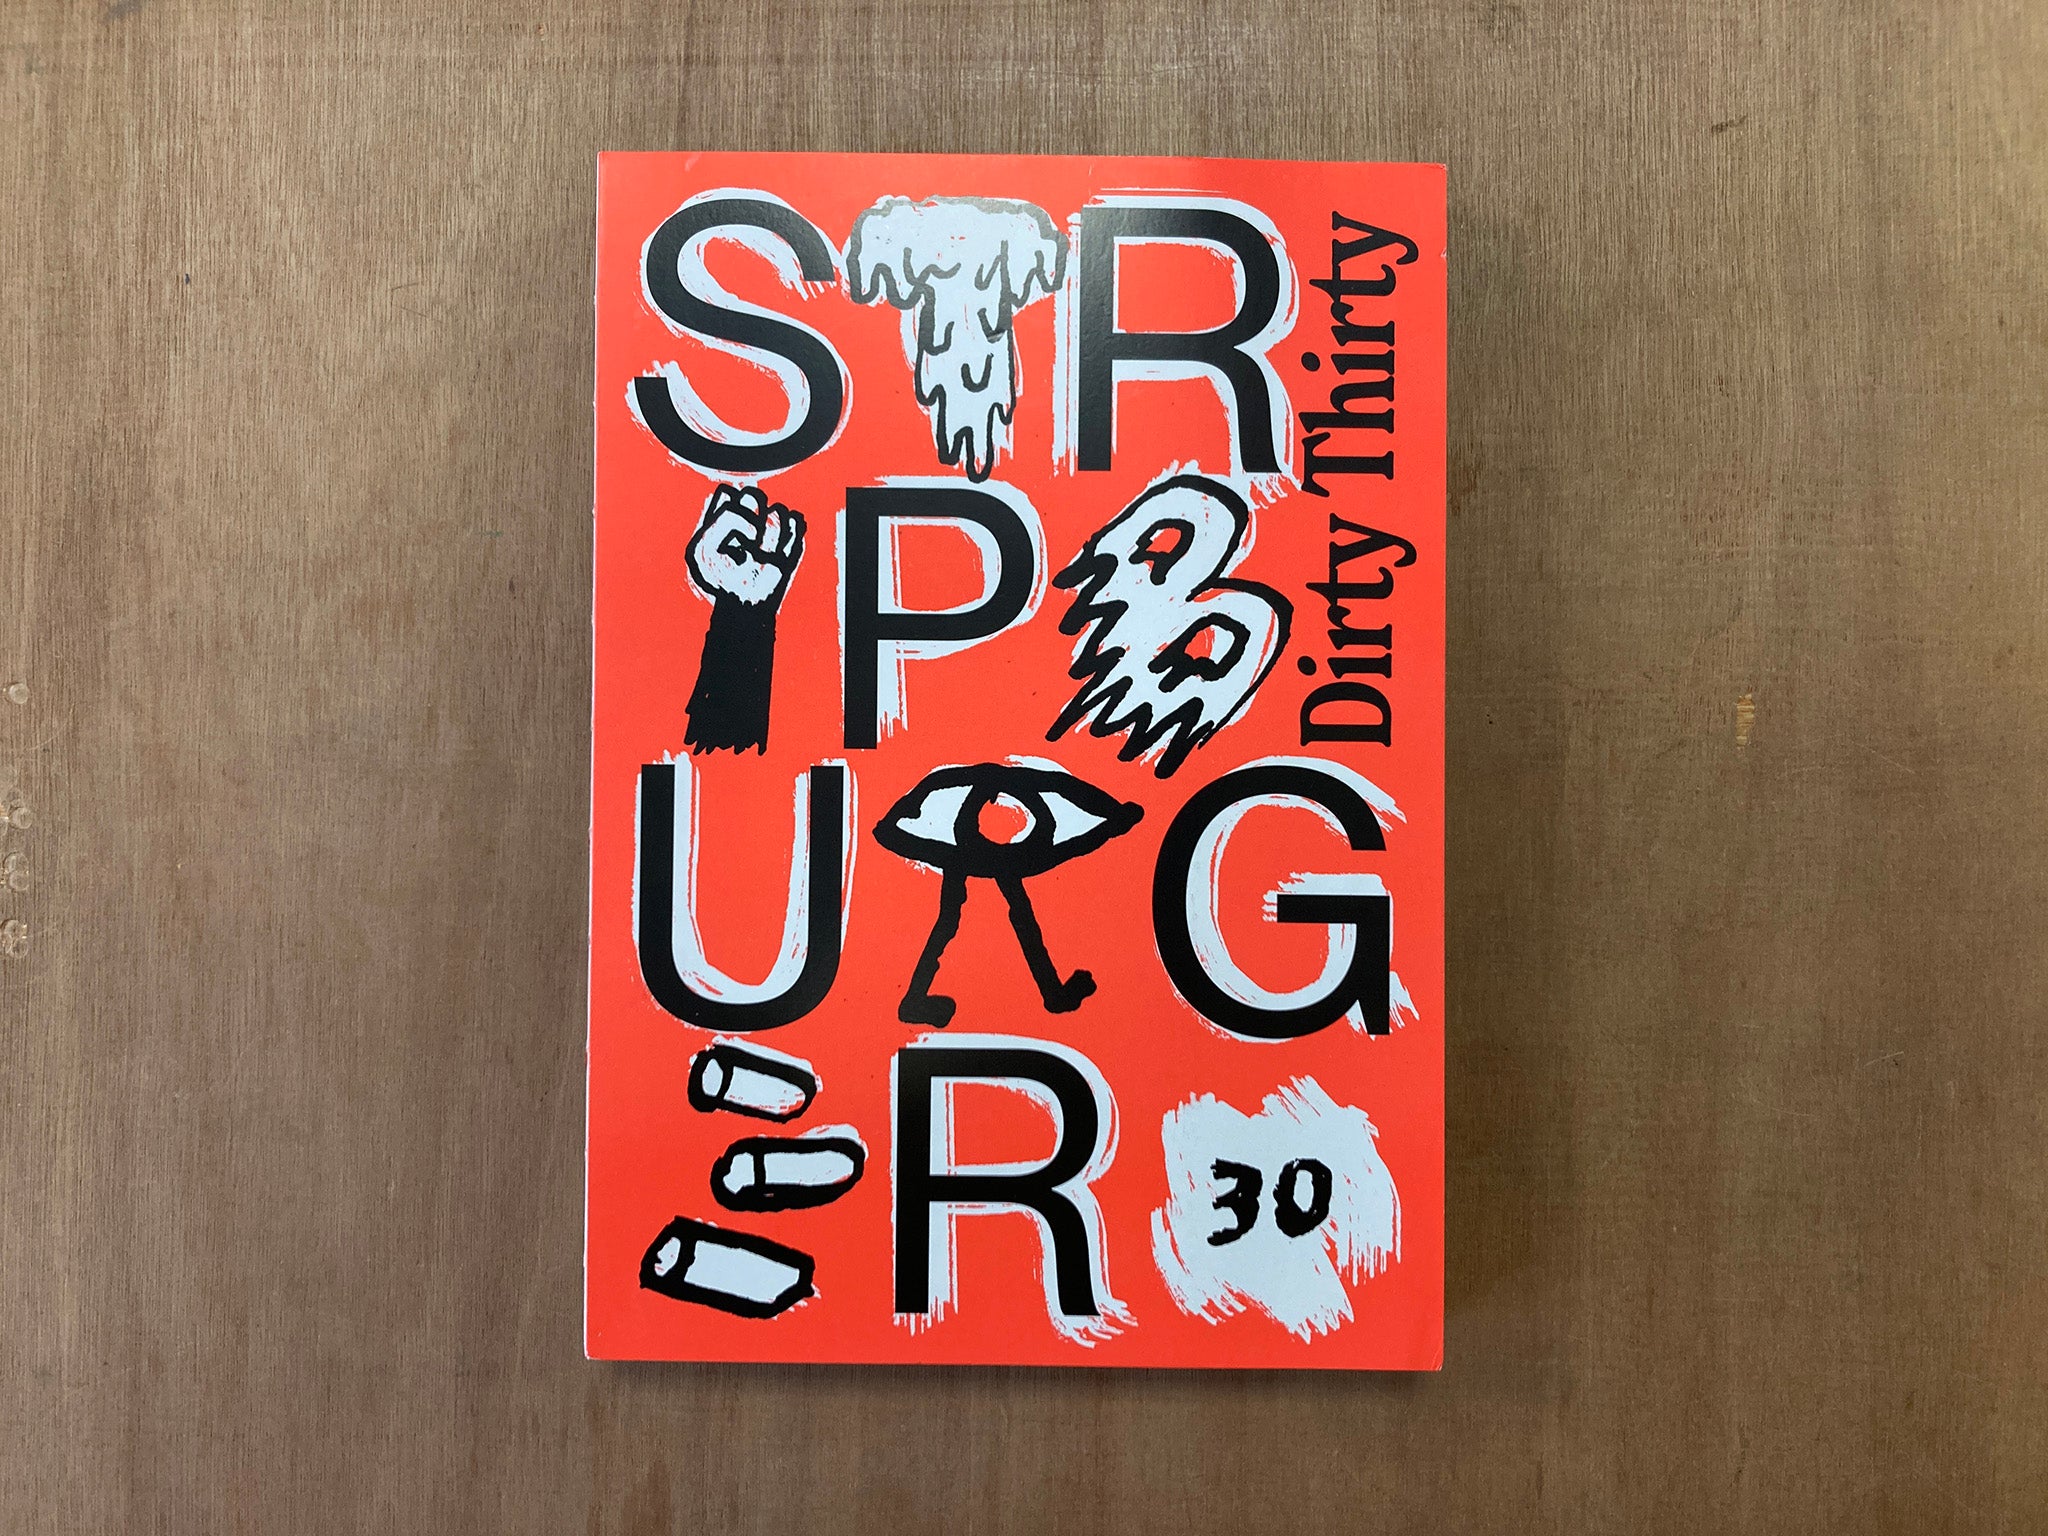 STRIPBURGER - DIRTY THIRTY: THIRTY YEARS OF MAKING A SCENE